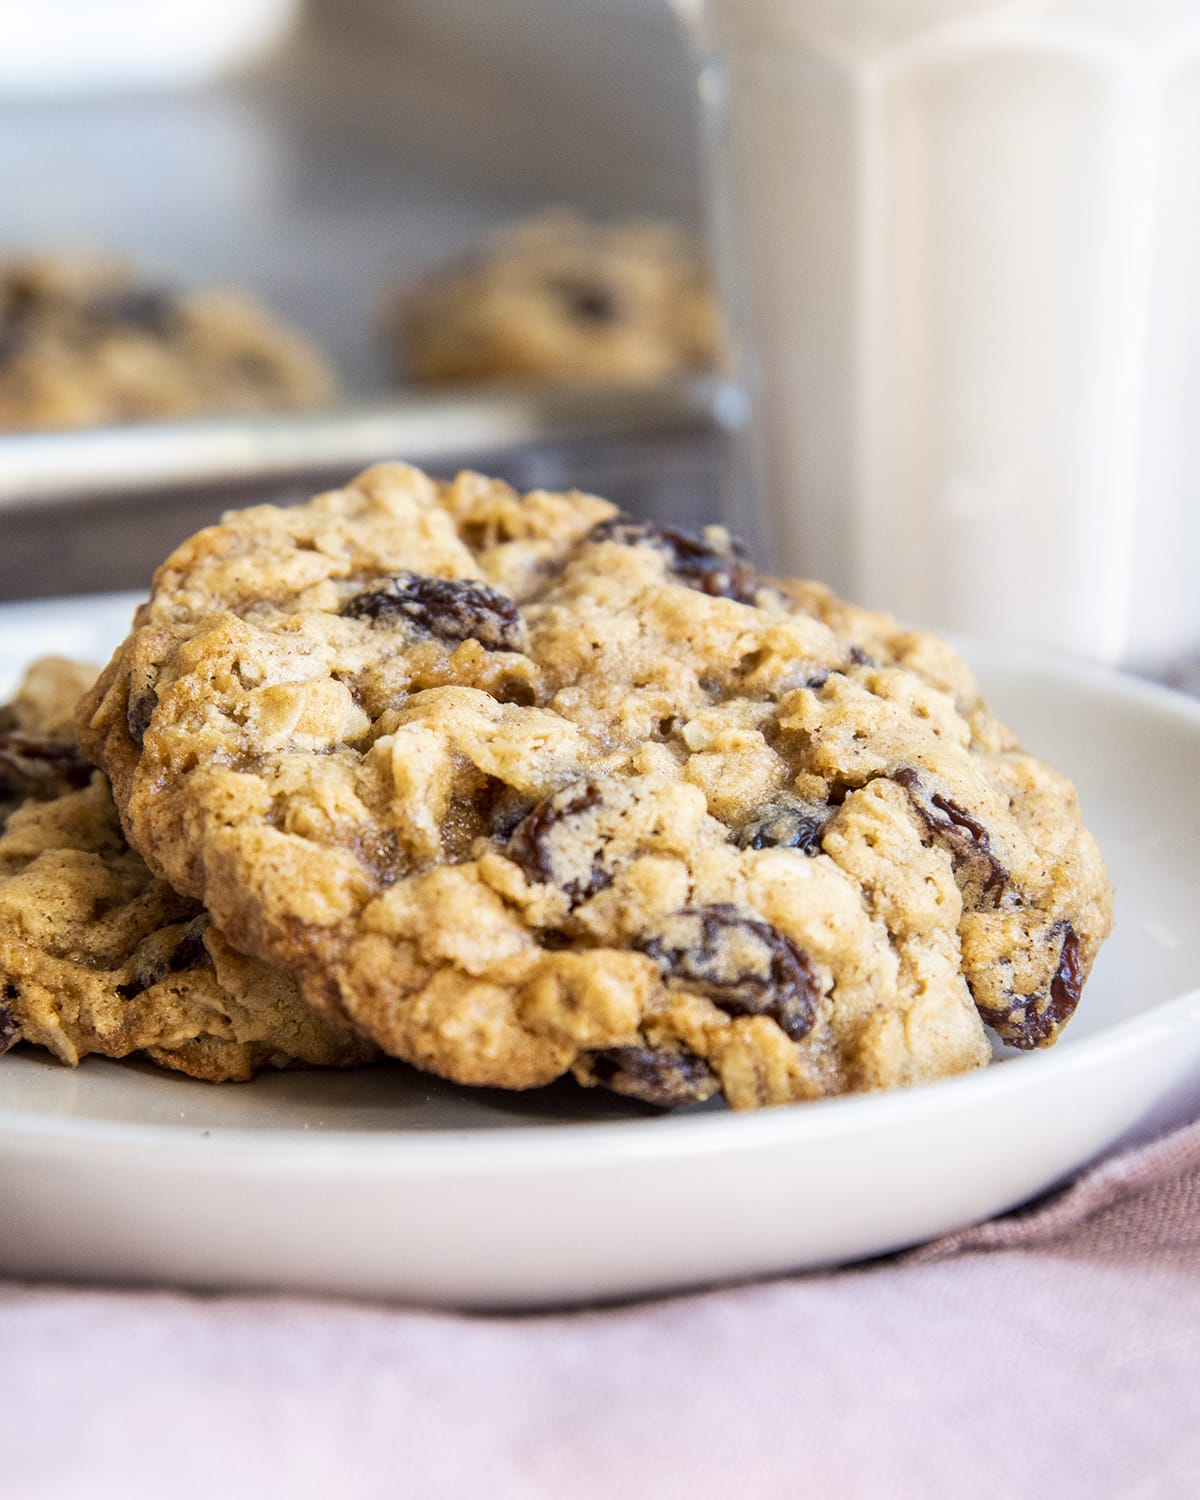 A close up of oatmeal raisin cookies on a plate.